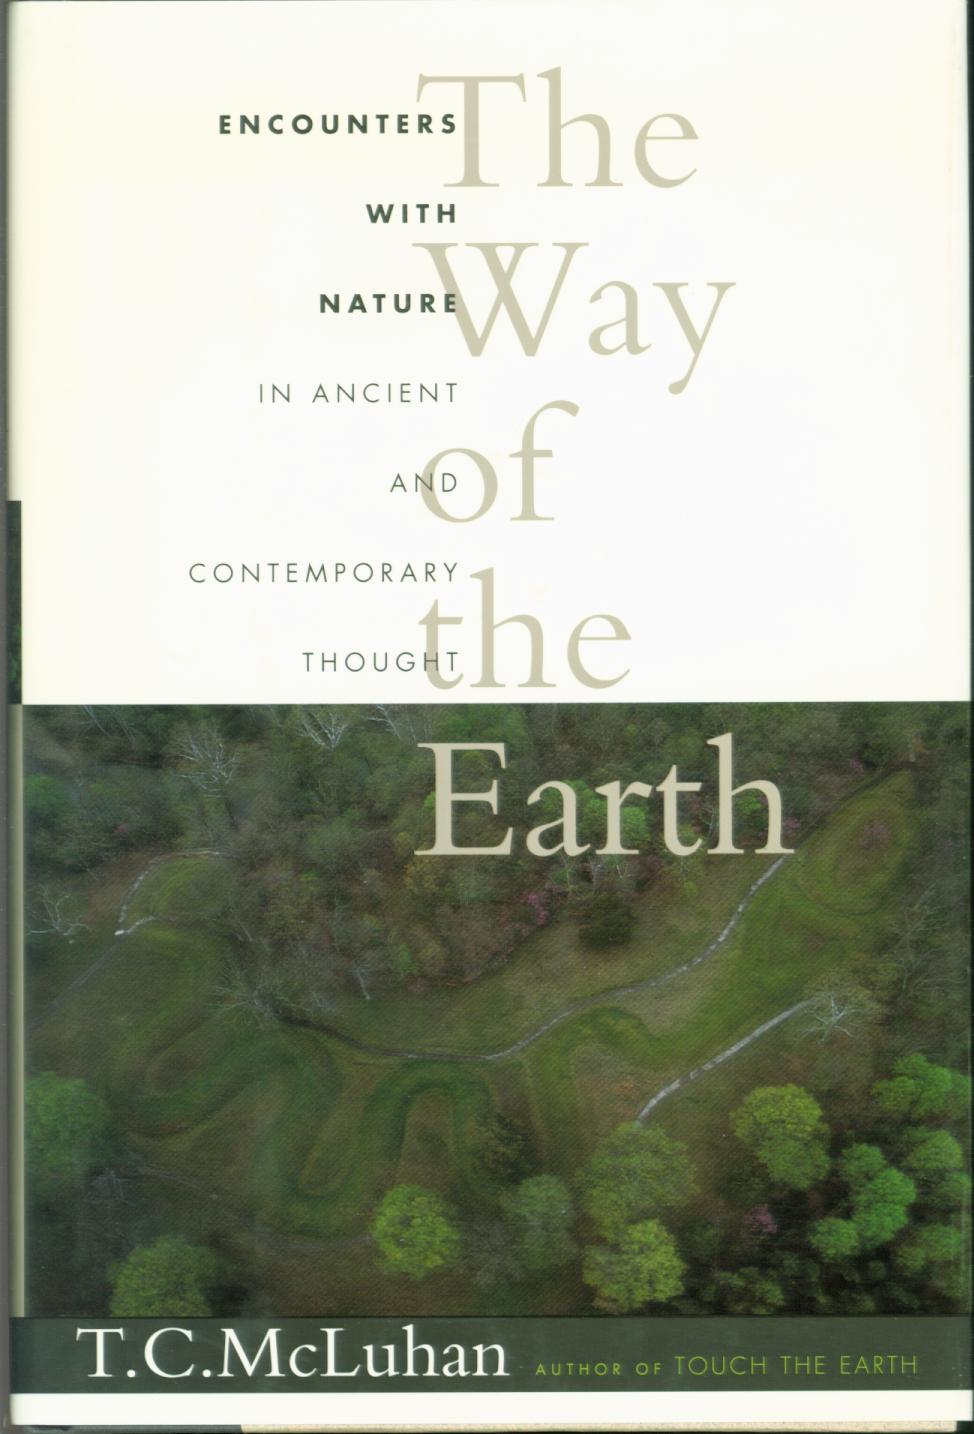 THE WAY OF THE EARTH: encounters with Nature in ancient and contemporary thought--cloth.